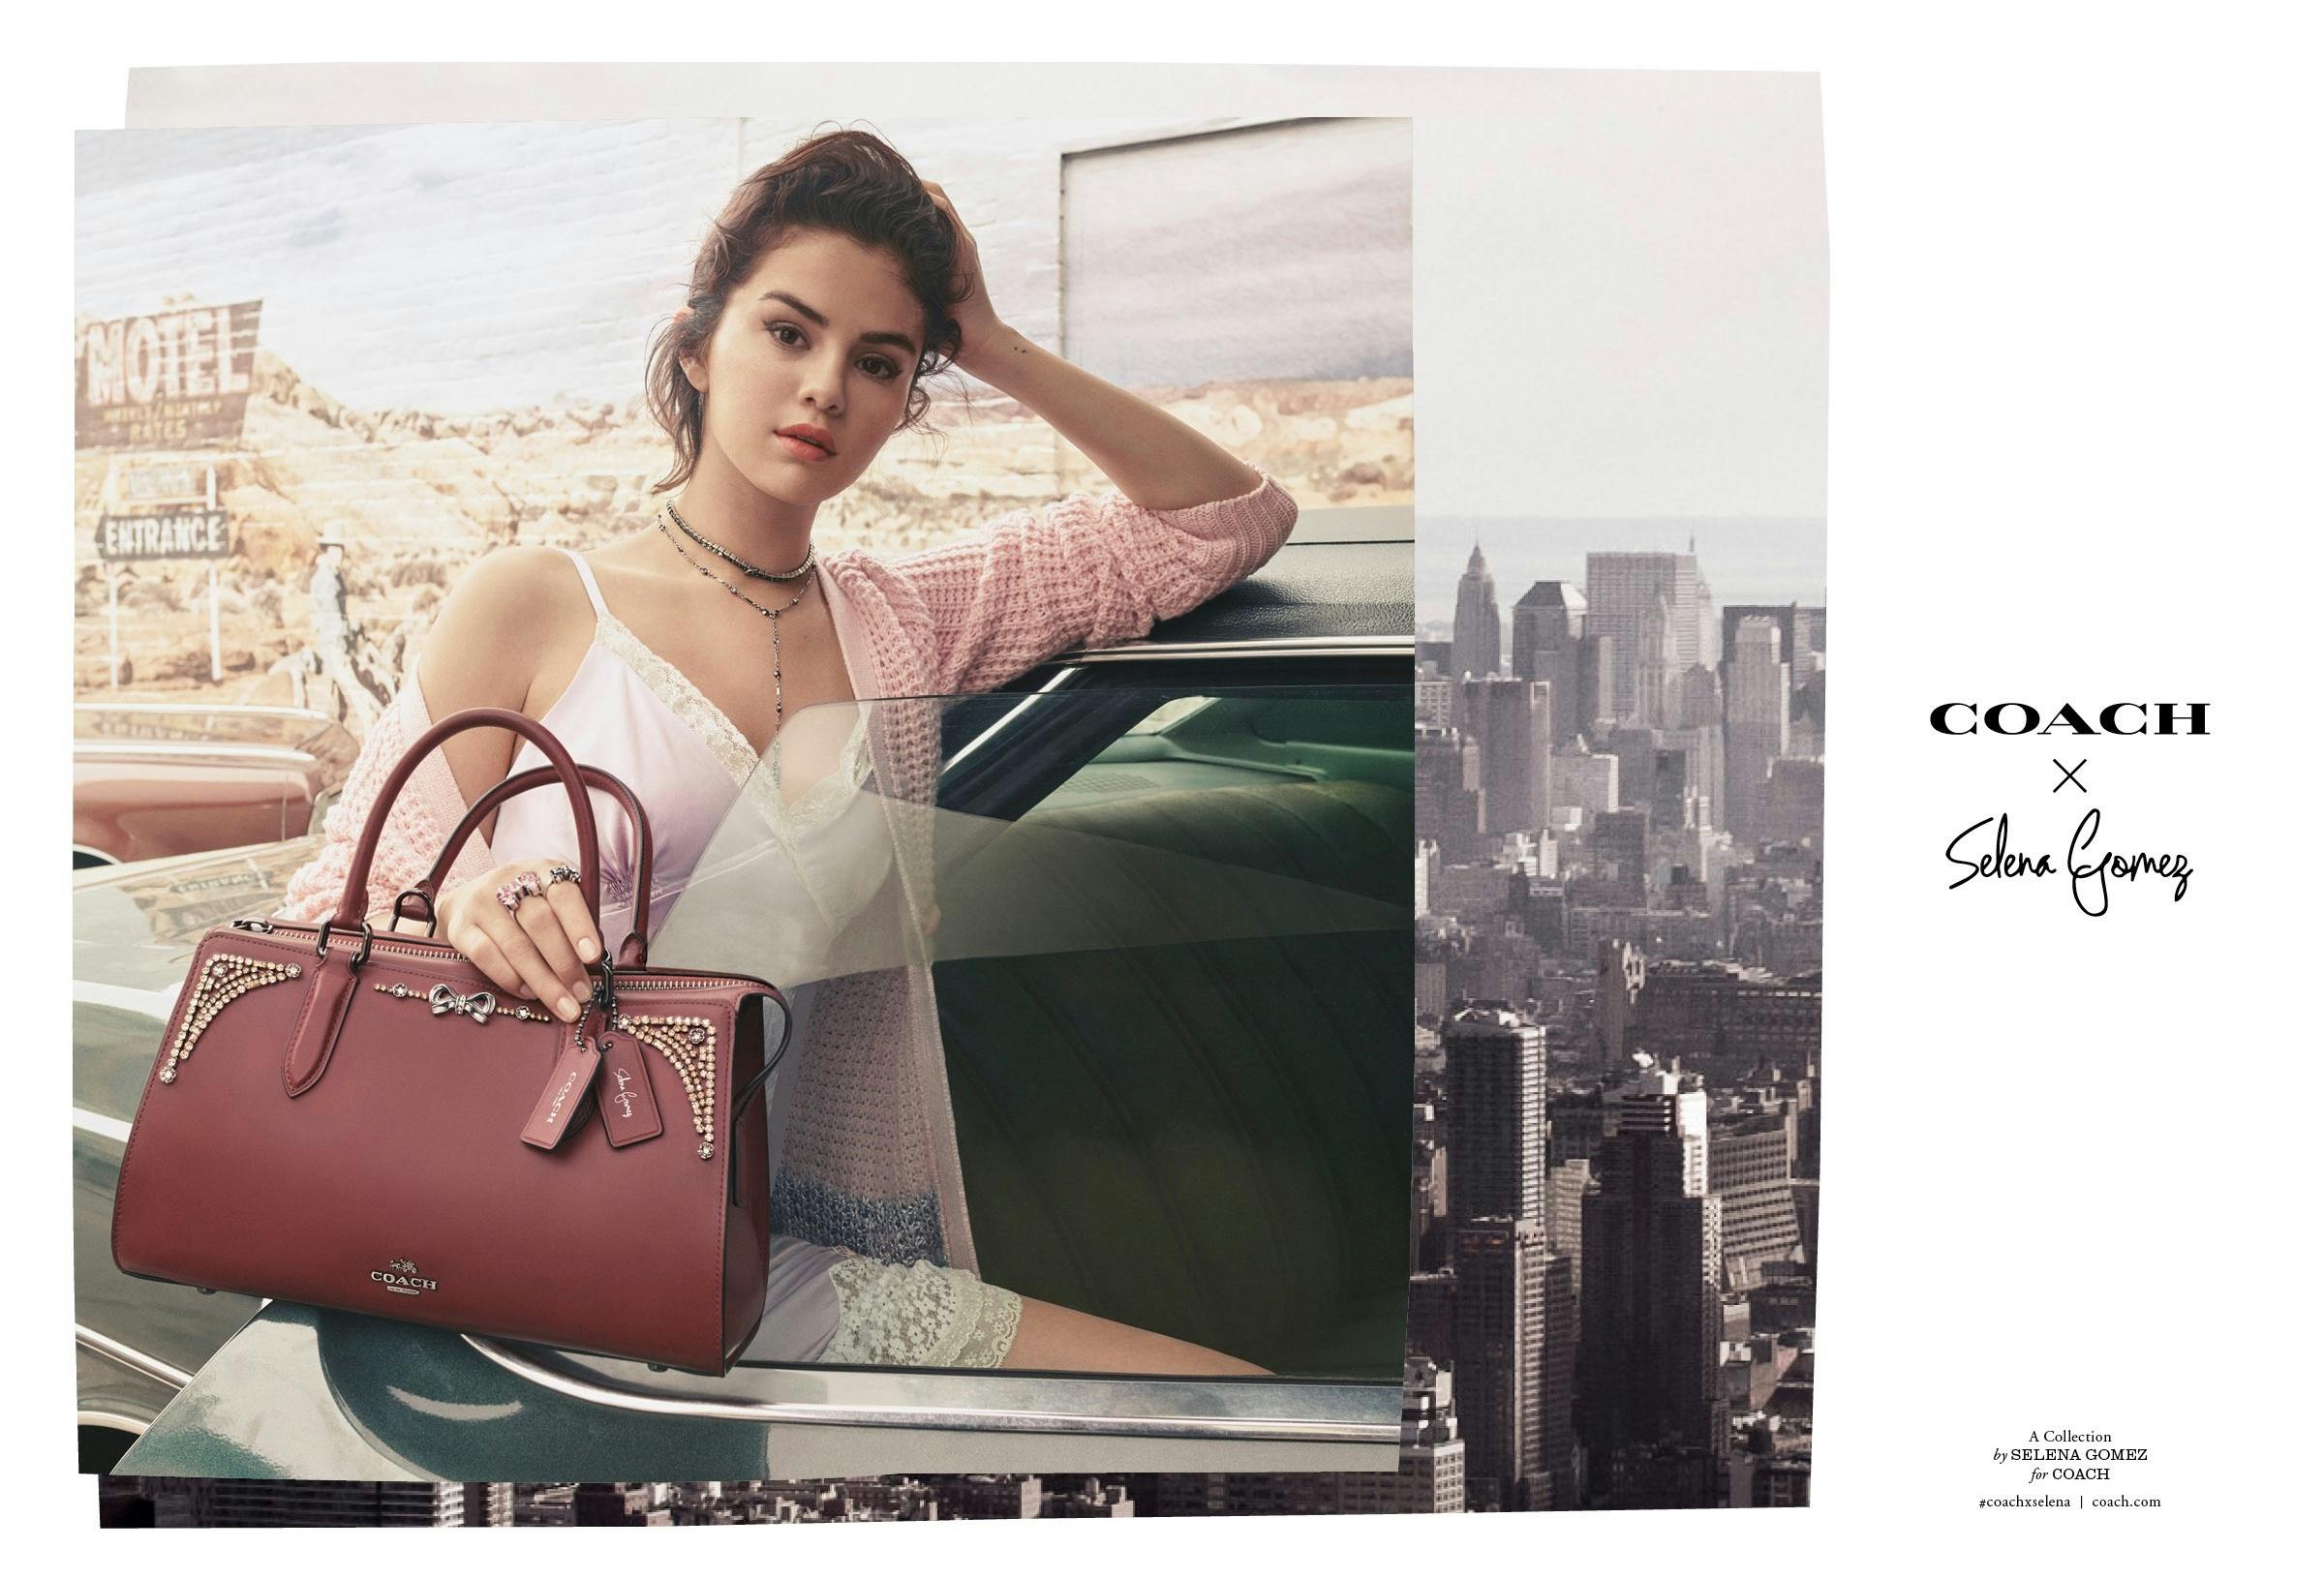 Selena Gomez's First Coach Campaign Photos Are Here